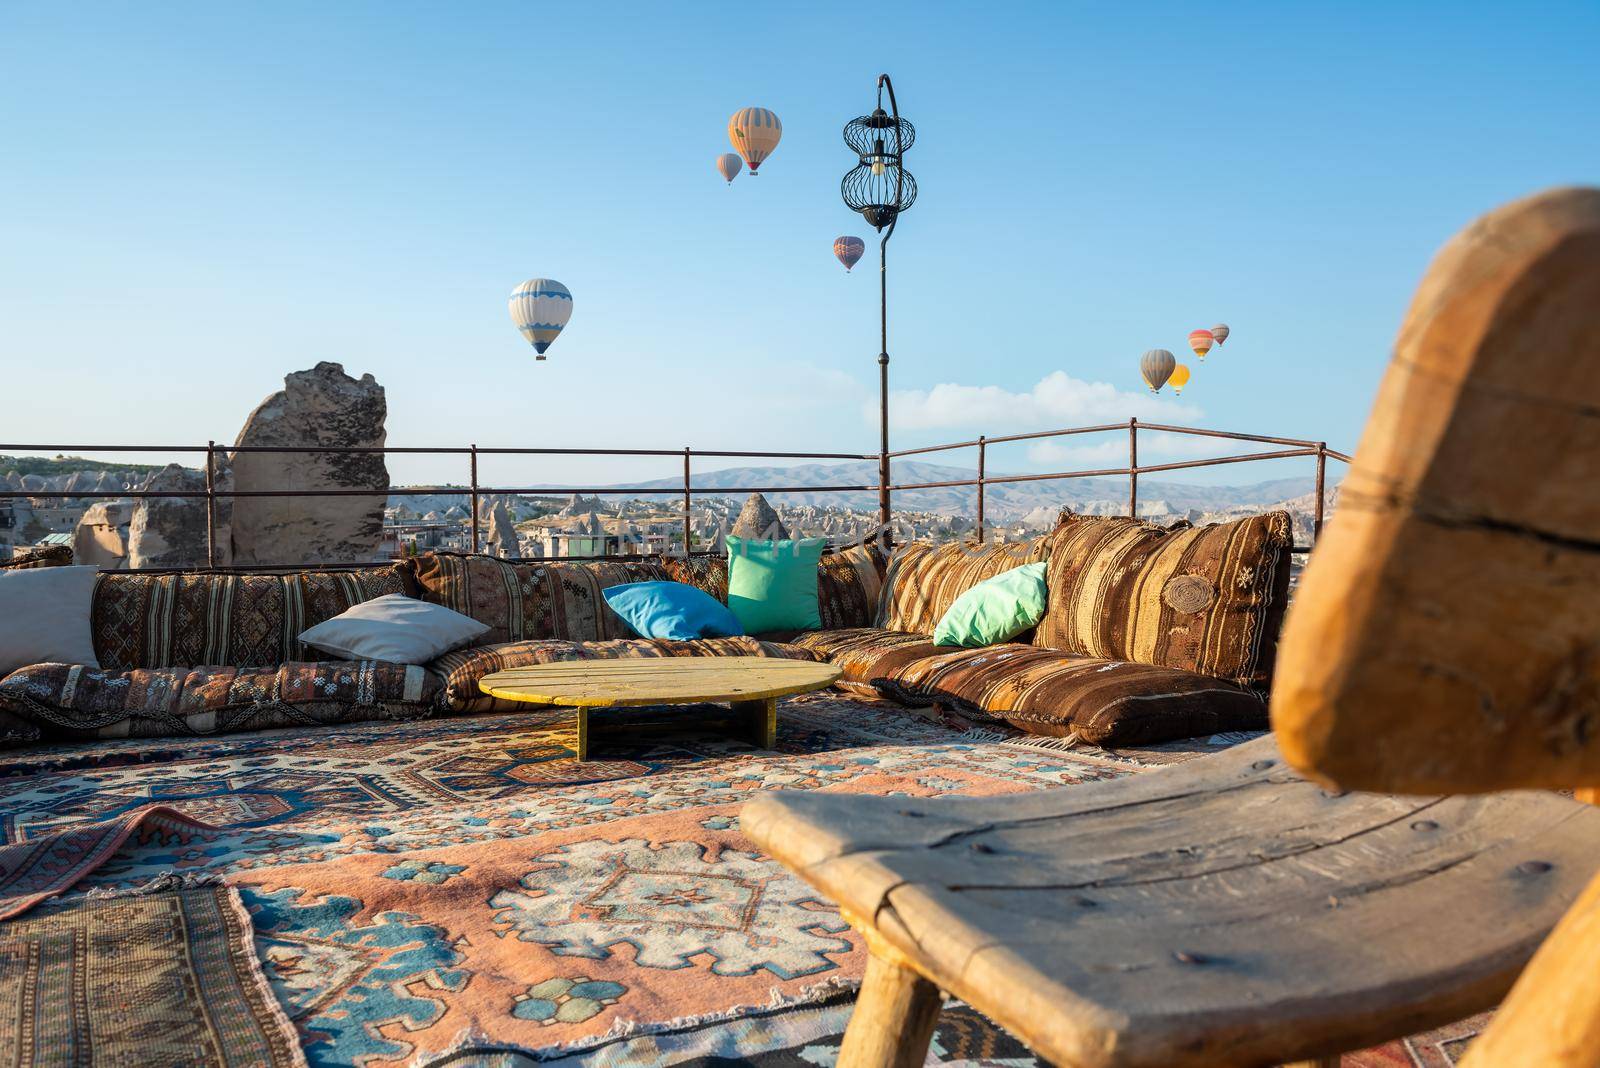 View from the cafe terrace in Cappadocia